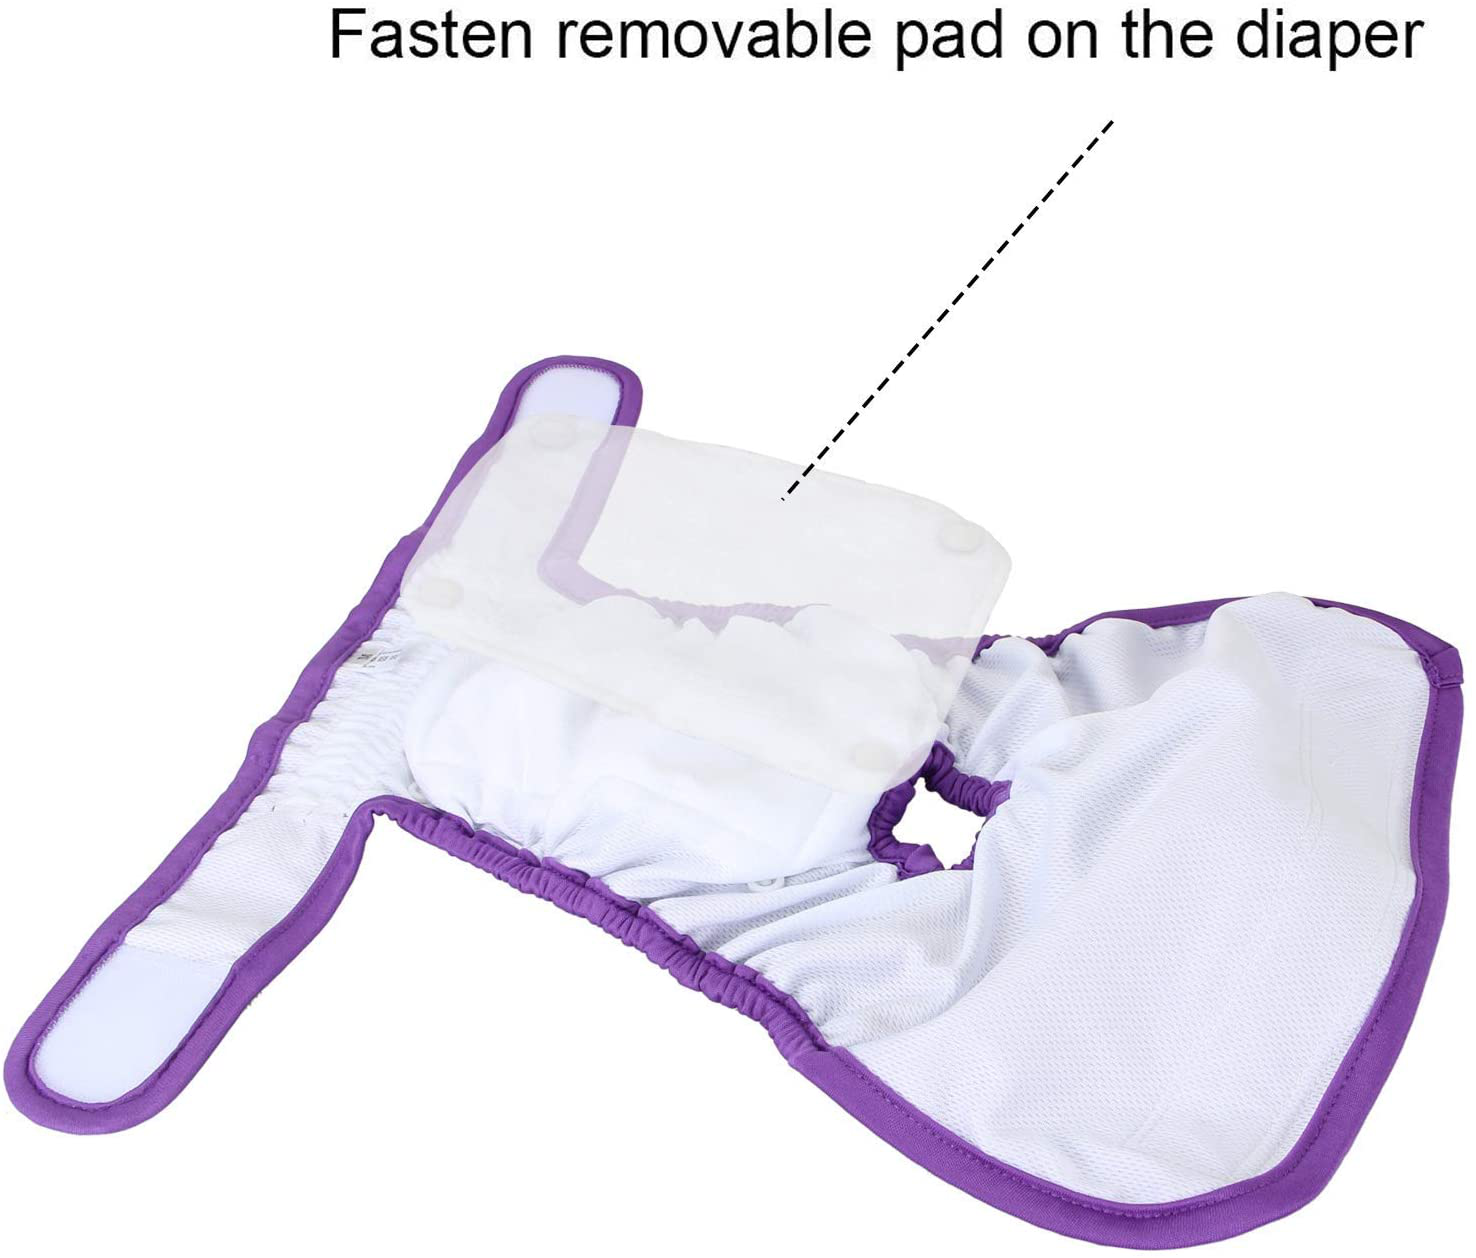 Teamoy Reusable Female Dog Diapers with Removable Pads(Pack of 4), Washable Doggie Diaper Wraps for Female Dogs, Super-Absorbent, Comfortable and Stylish